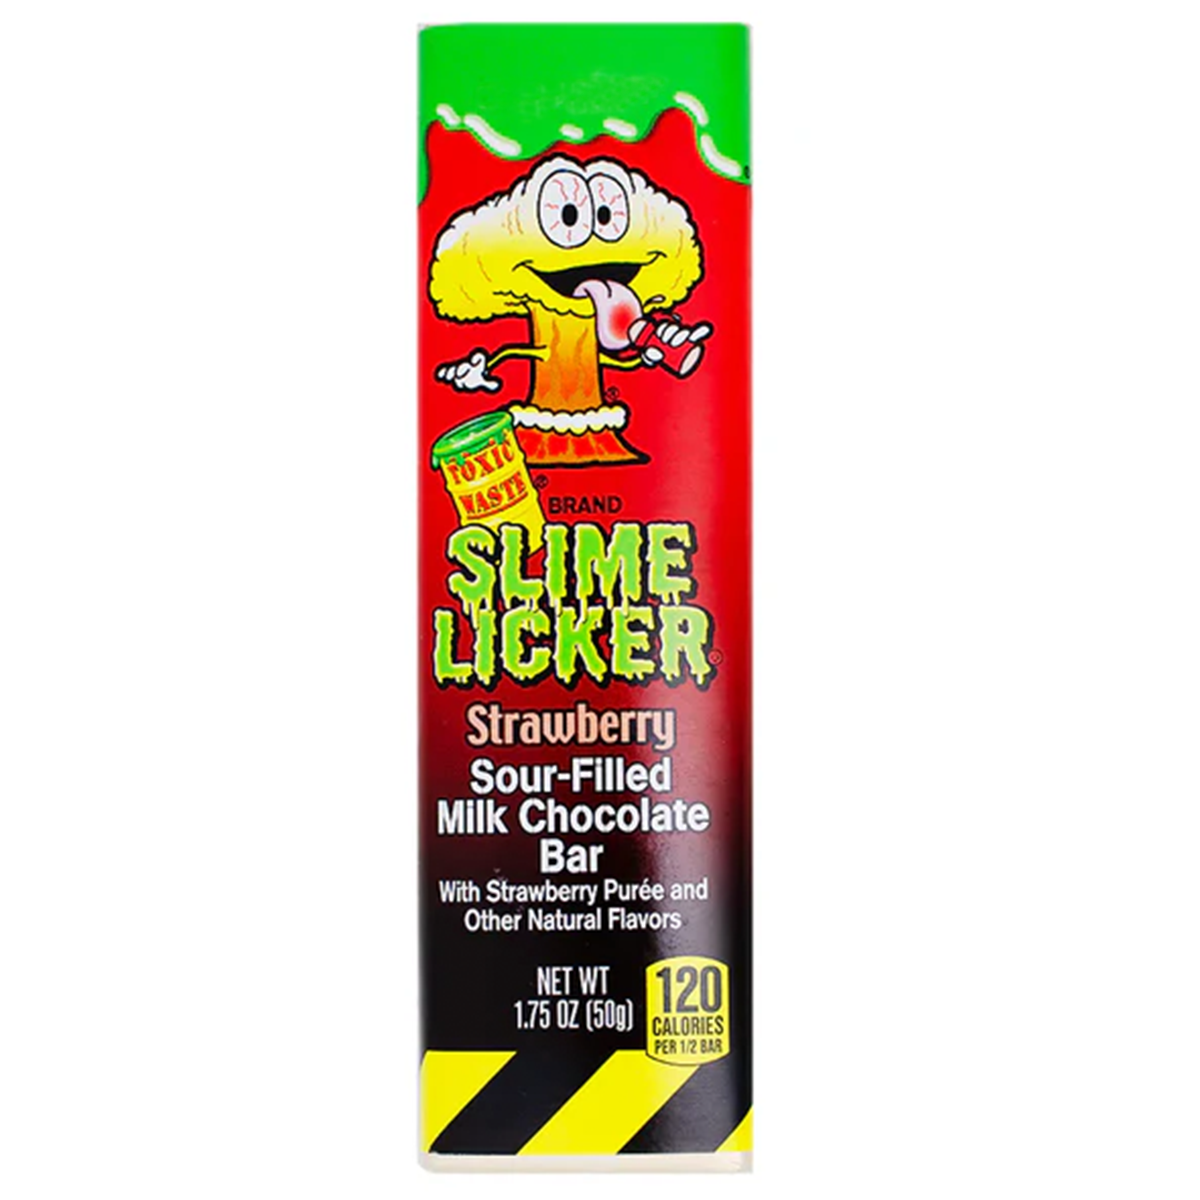 TOXIC WASTE® Brand Slime Licker Strawberry Sour-Filled Milk Chocolate Bar